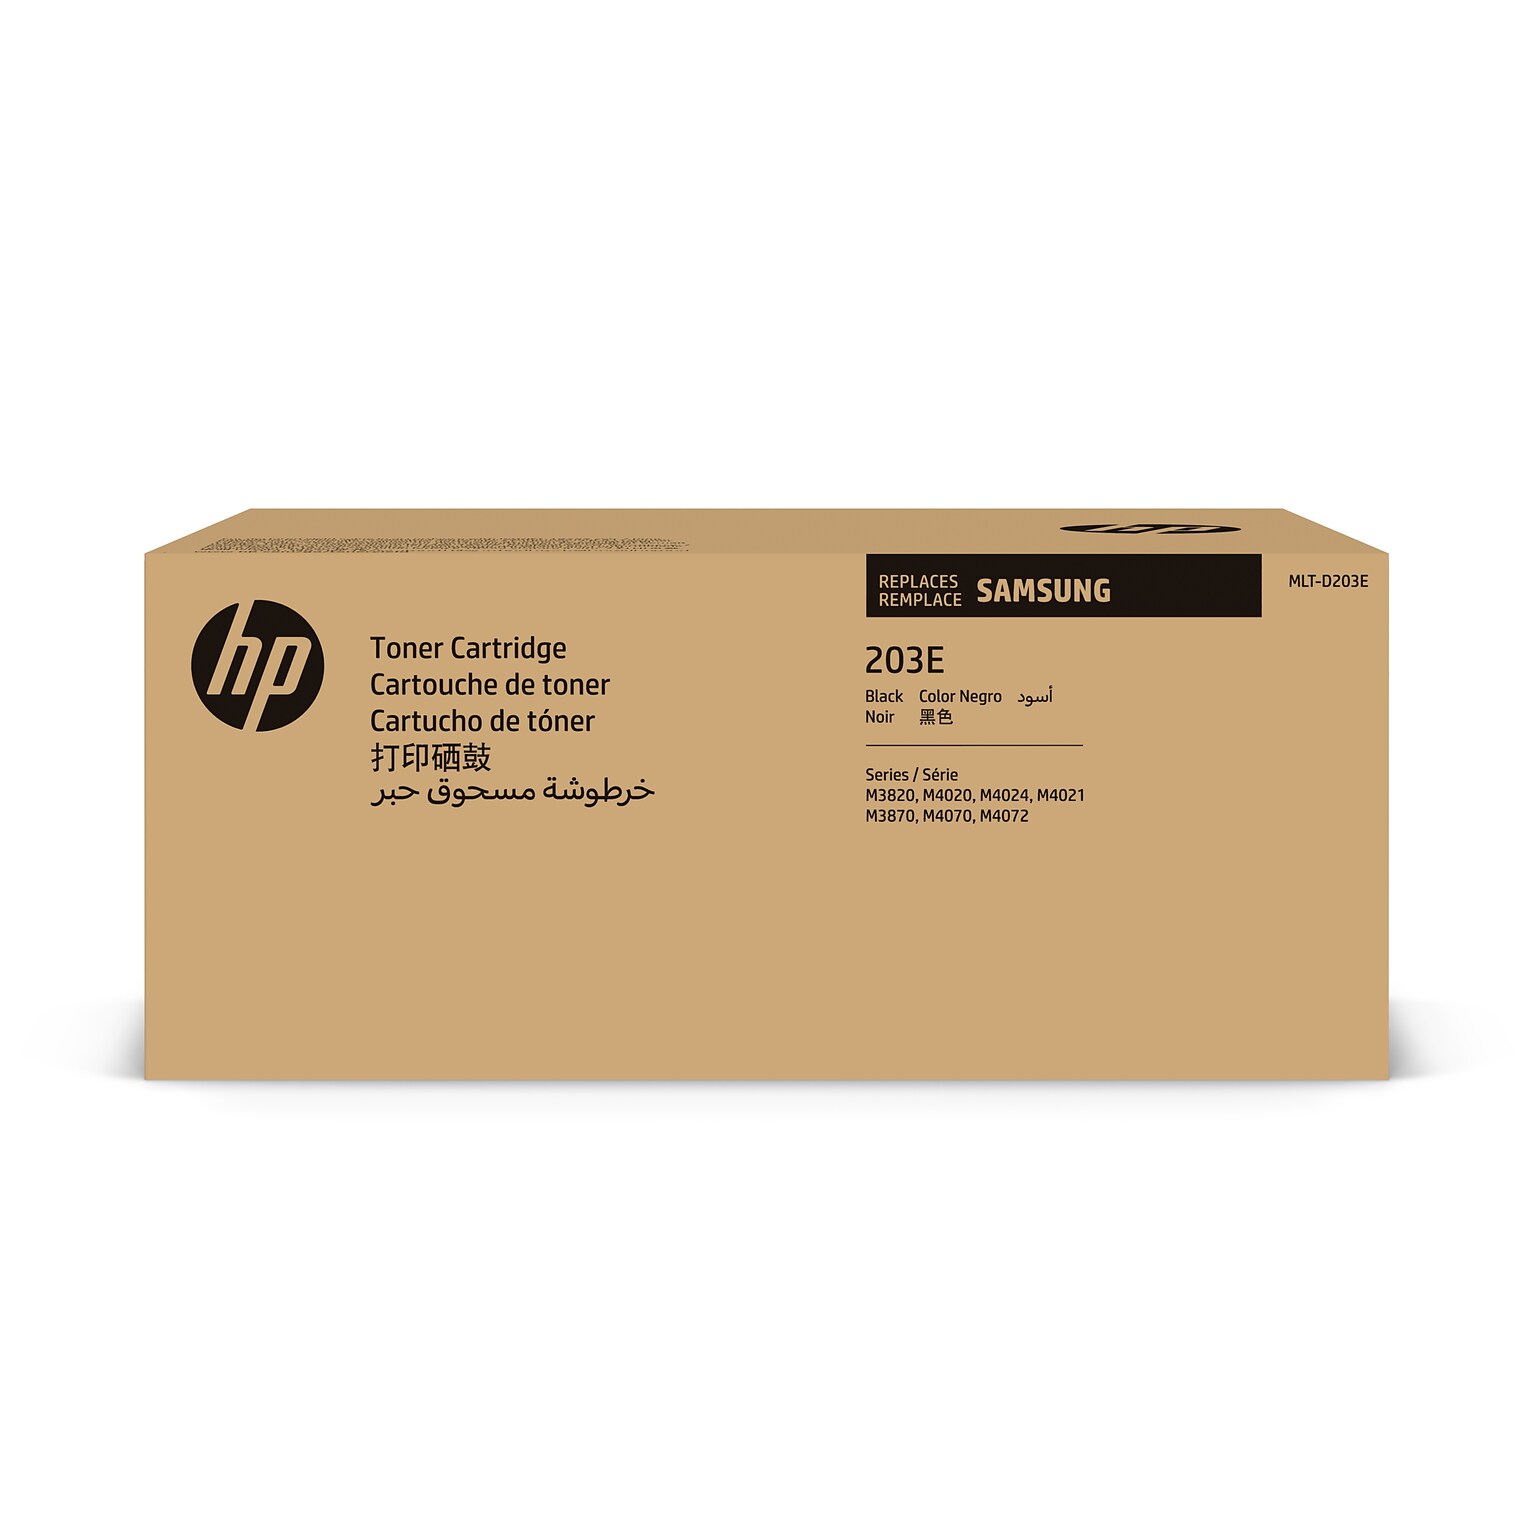 HP 203E Black Toner Cartridge for Samsung MLT-D203E (SU885), Samsung-branded printer supplies are now HP-branded